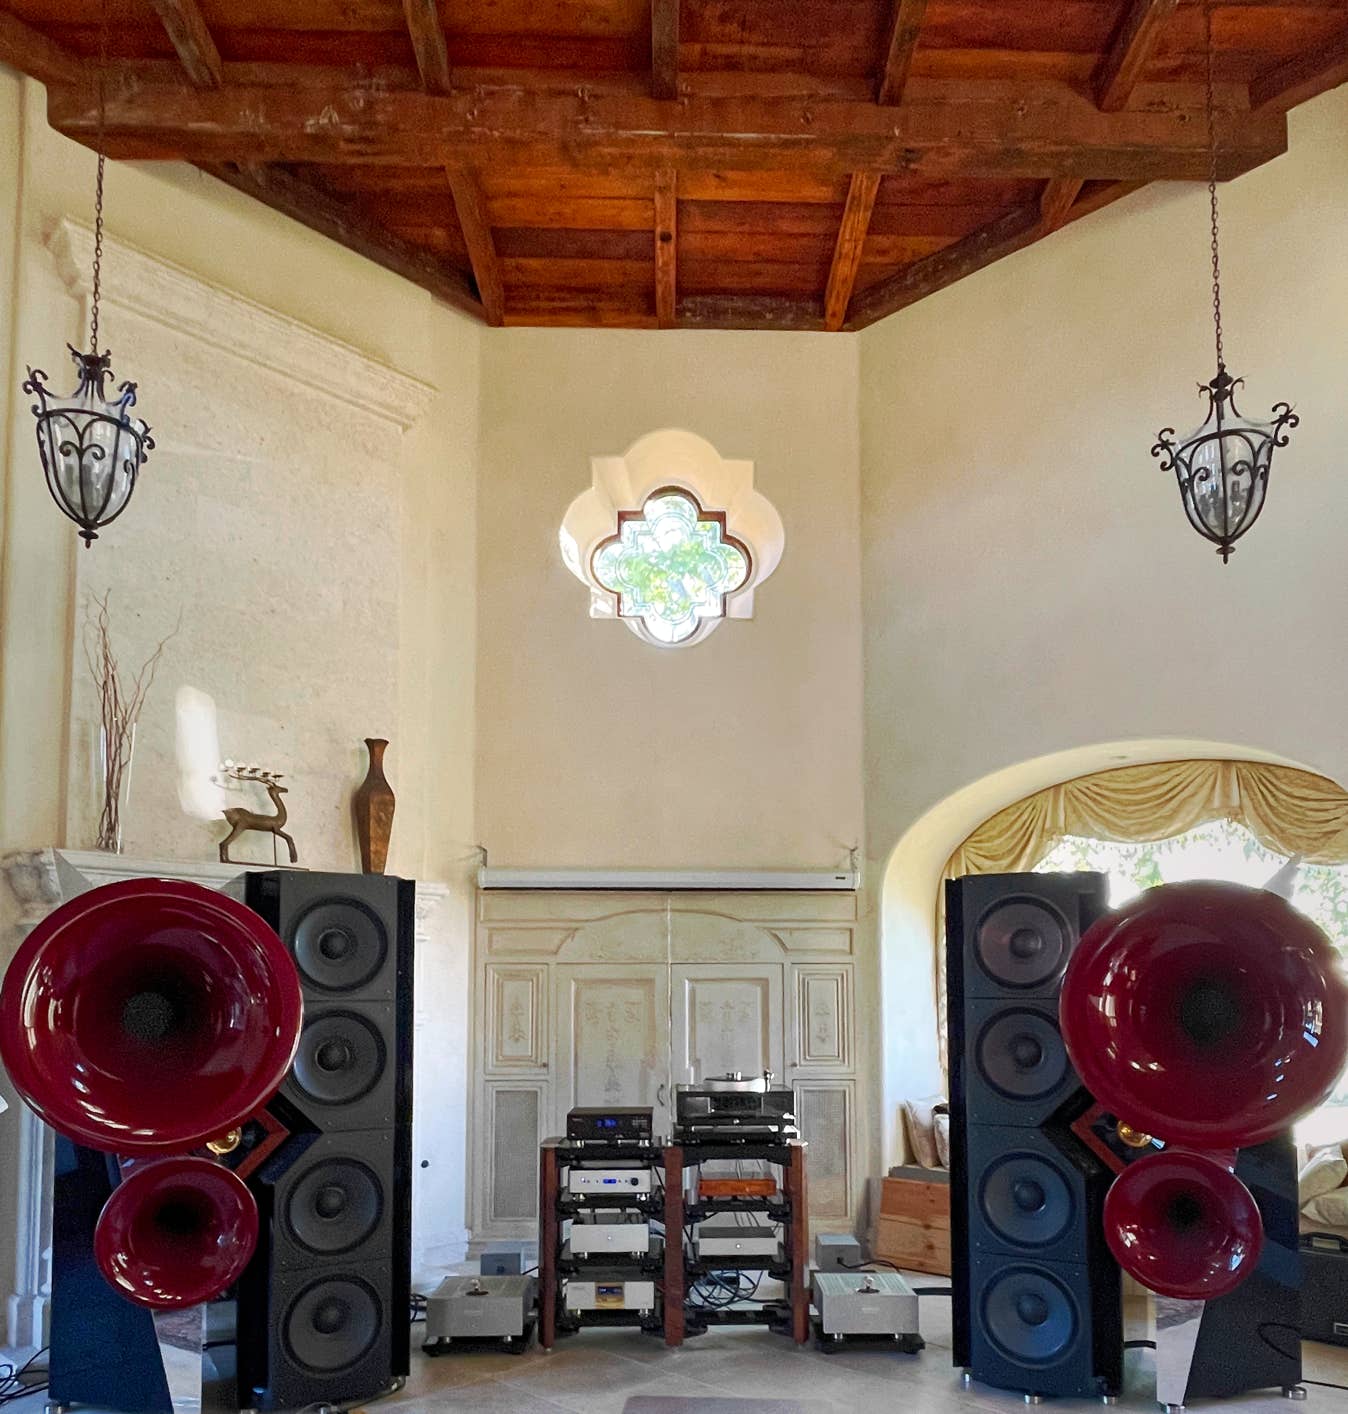 Jims main system with $1M speakers and HIFI One components